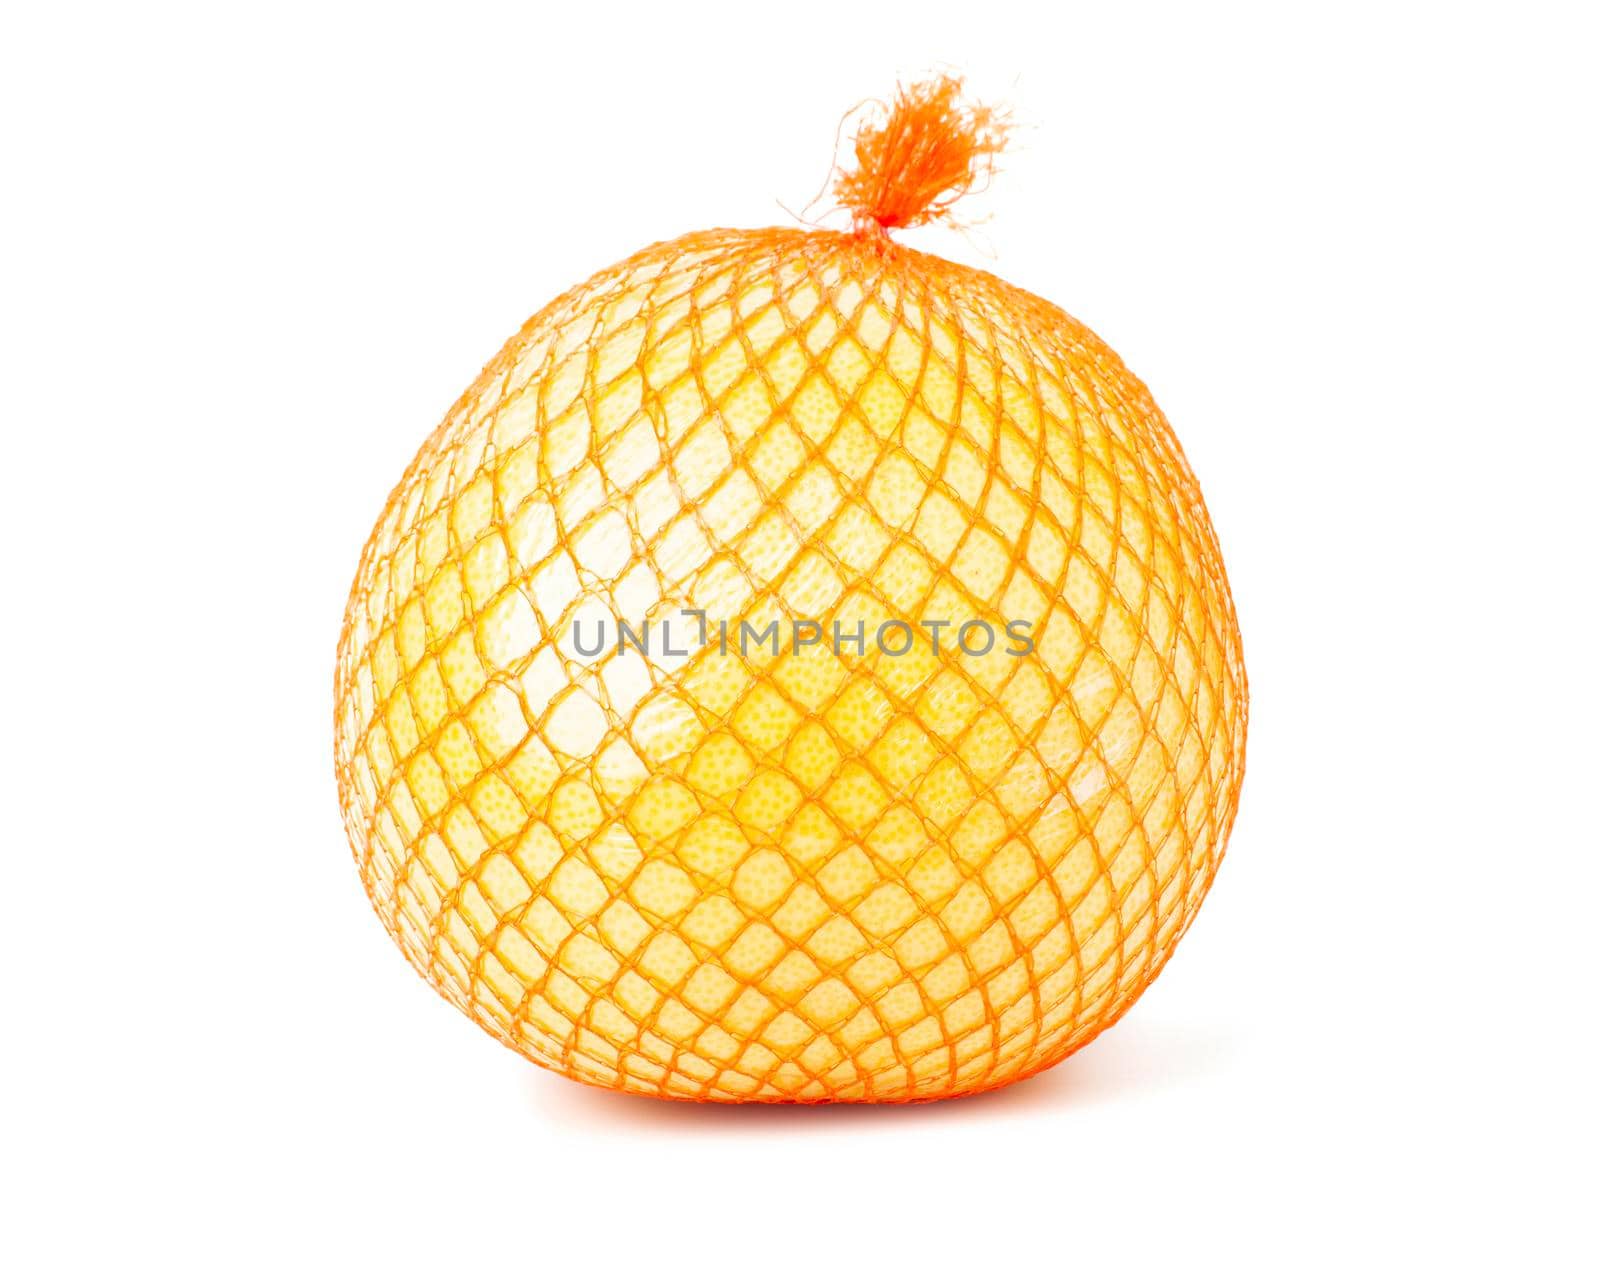 Pomelo citrus fruit in a shipping orange package close up isolated on a white background